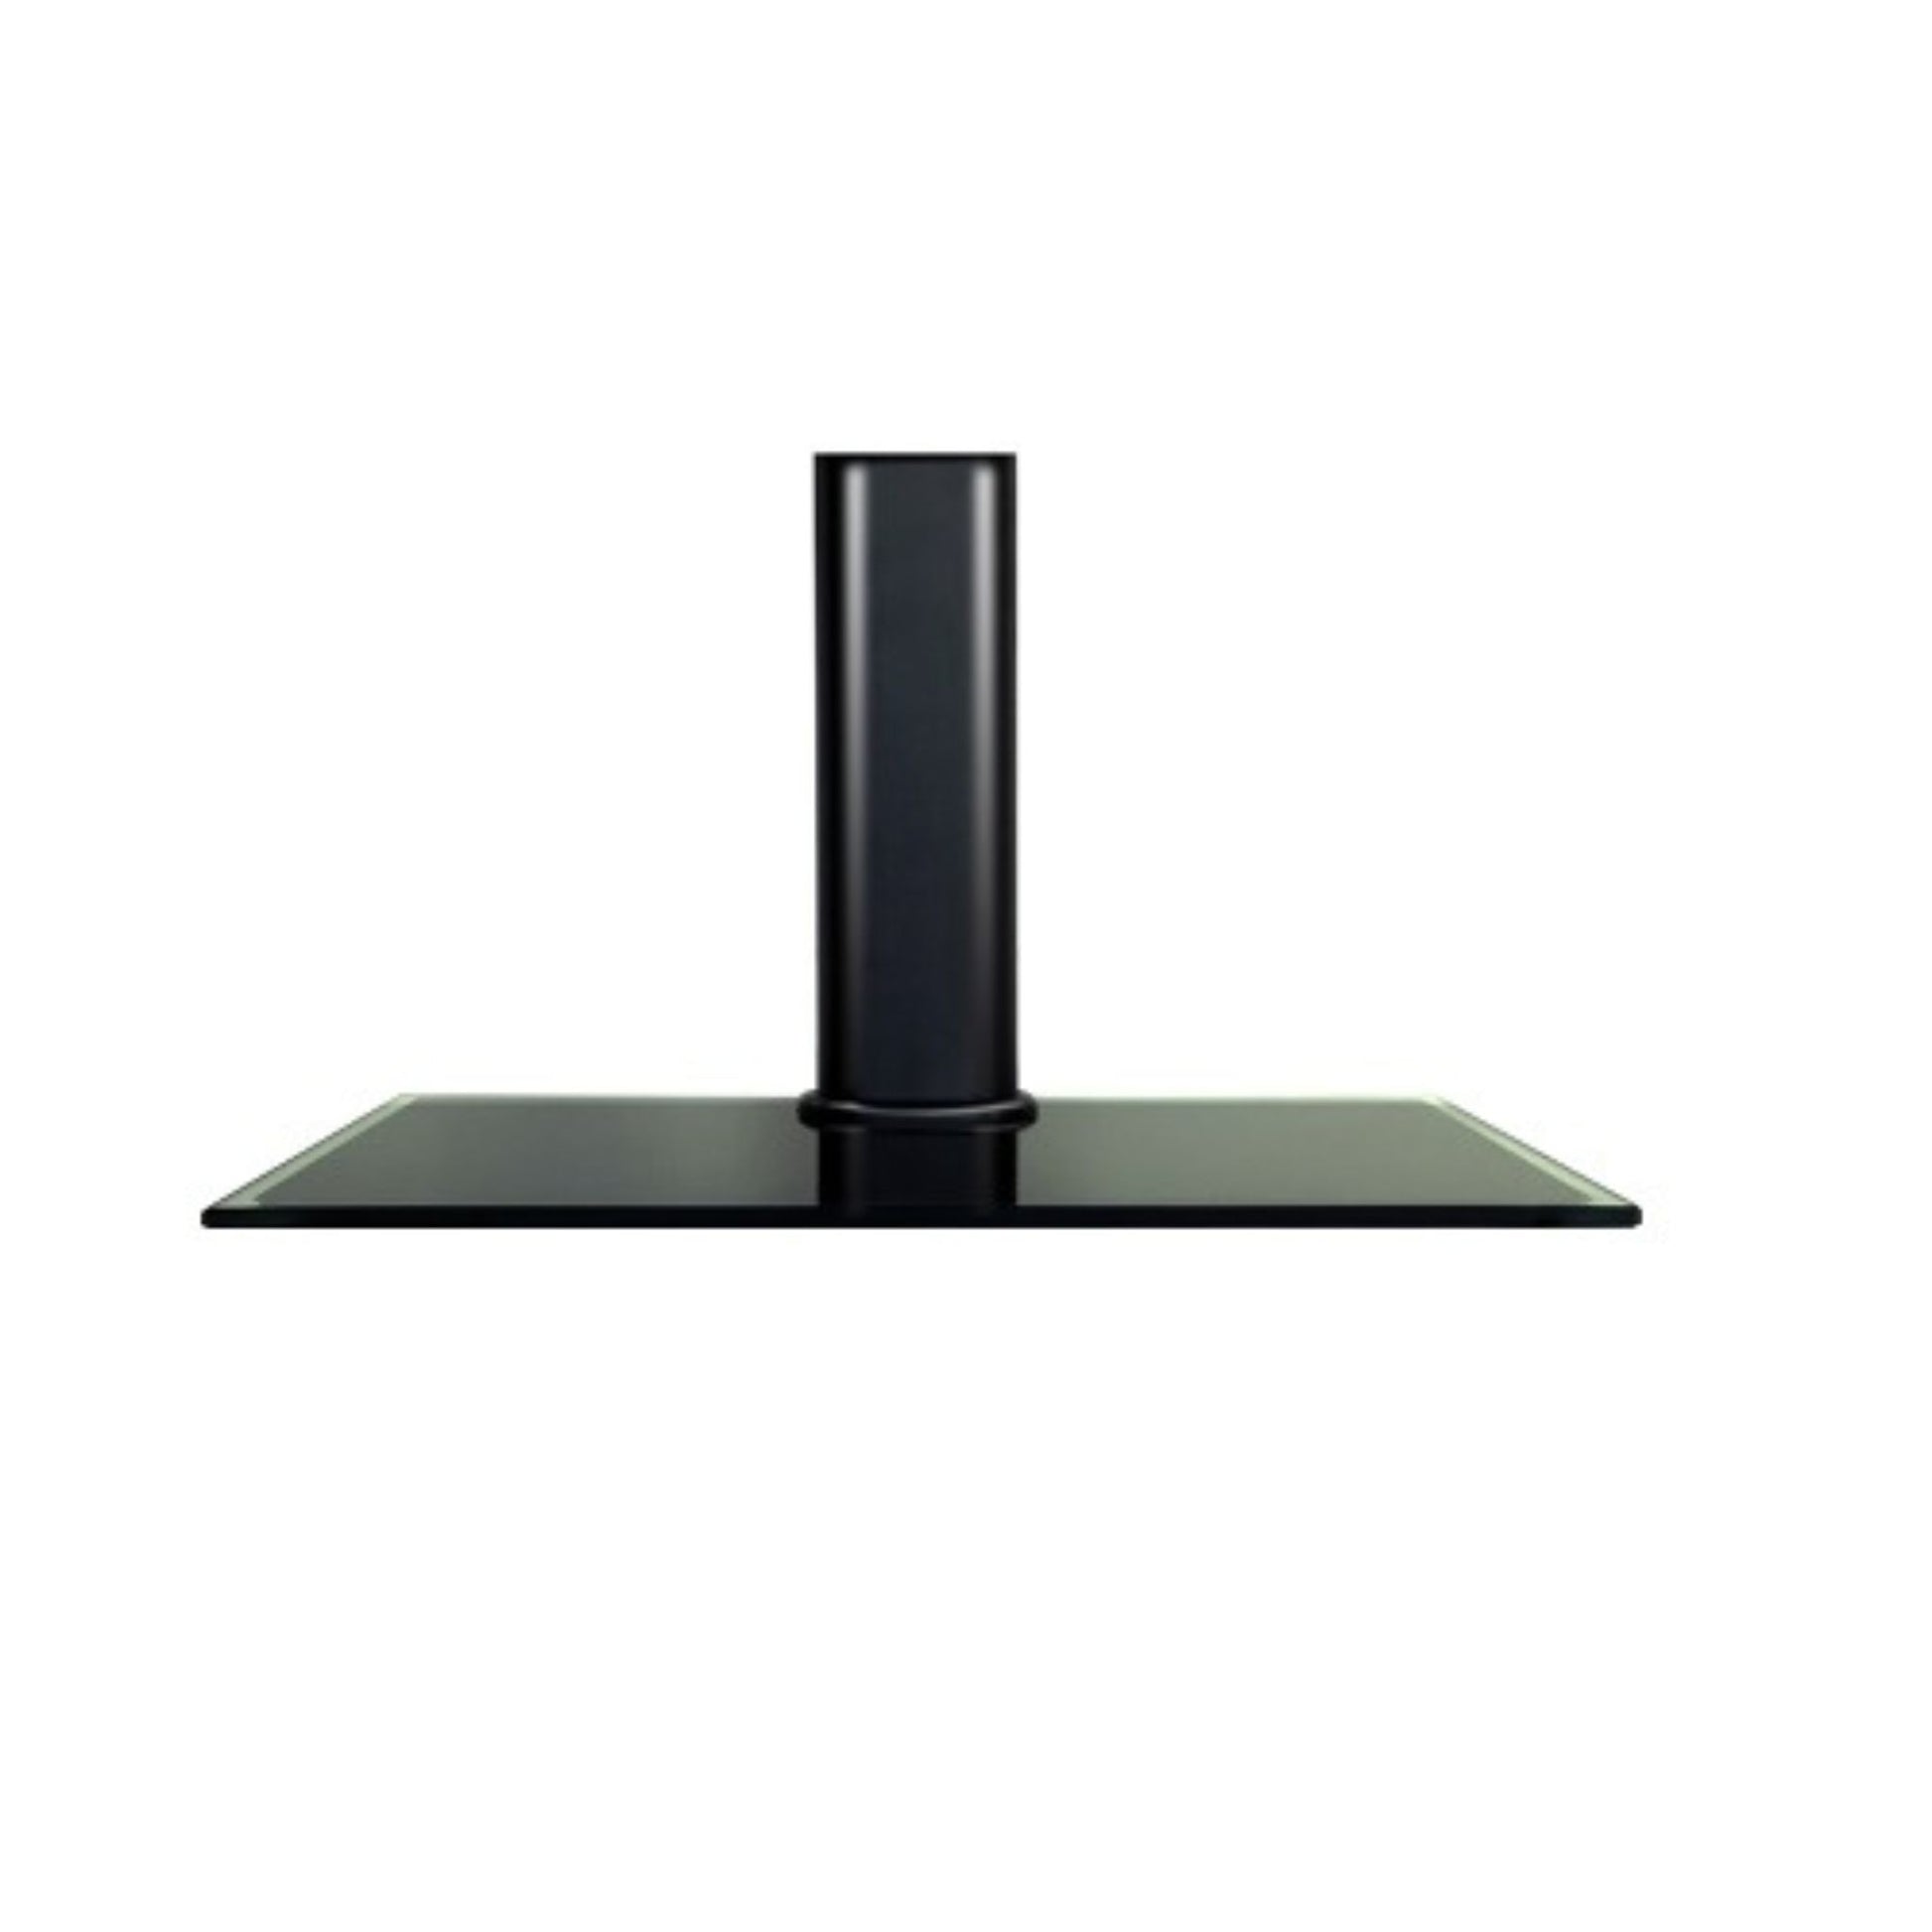 Star Gold Universal Table Top TV Stand, SG-805